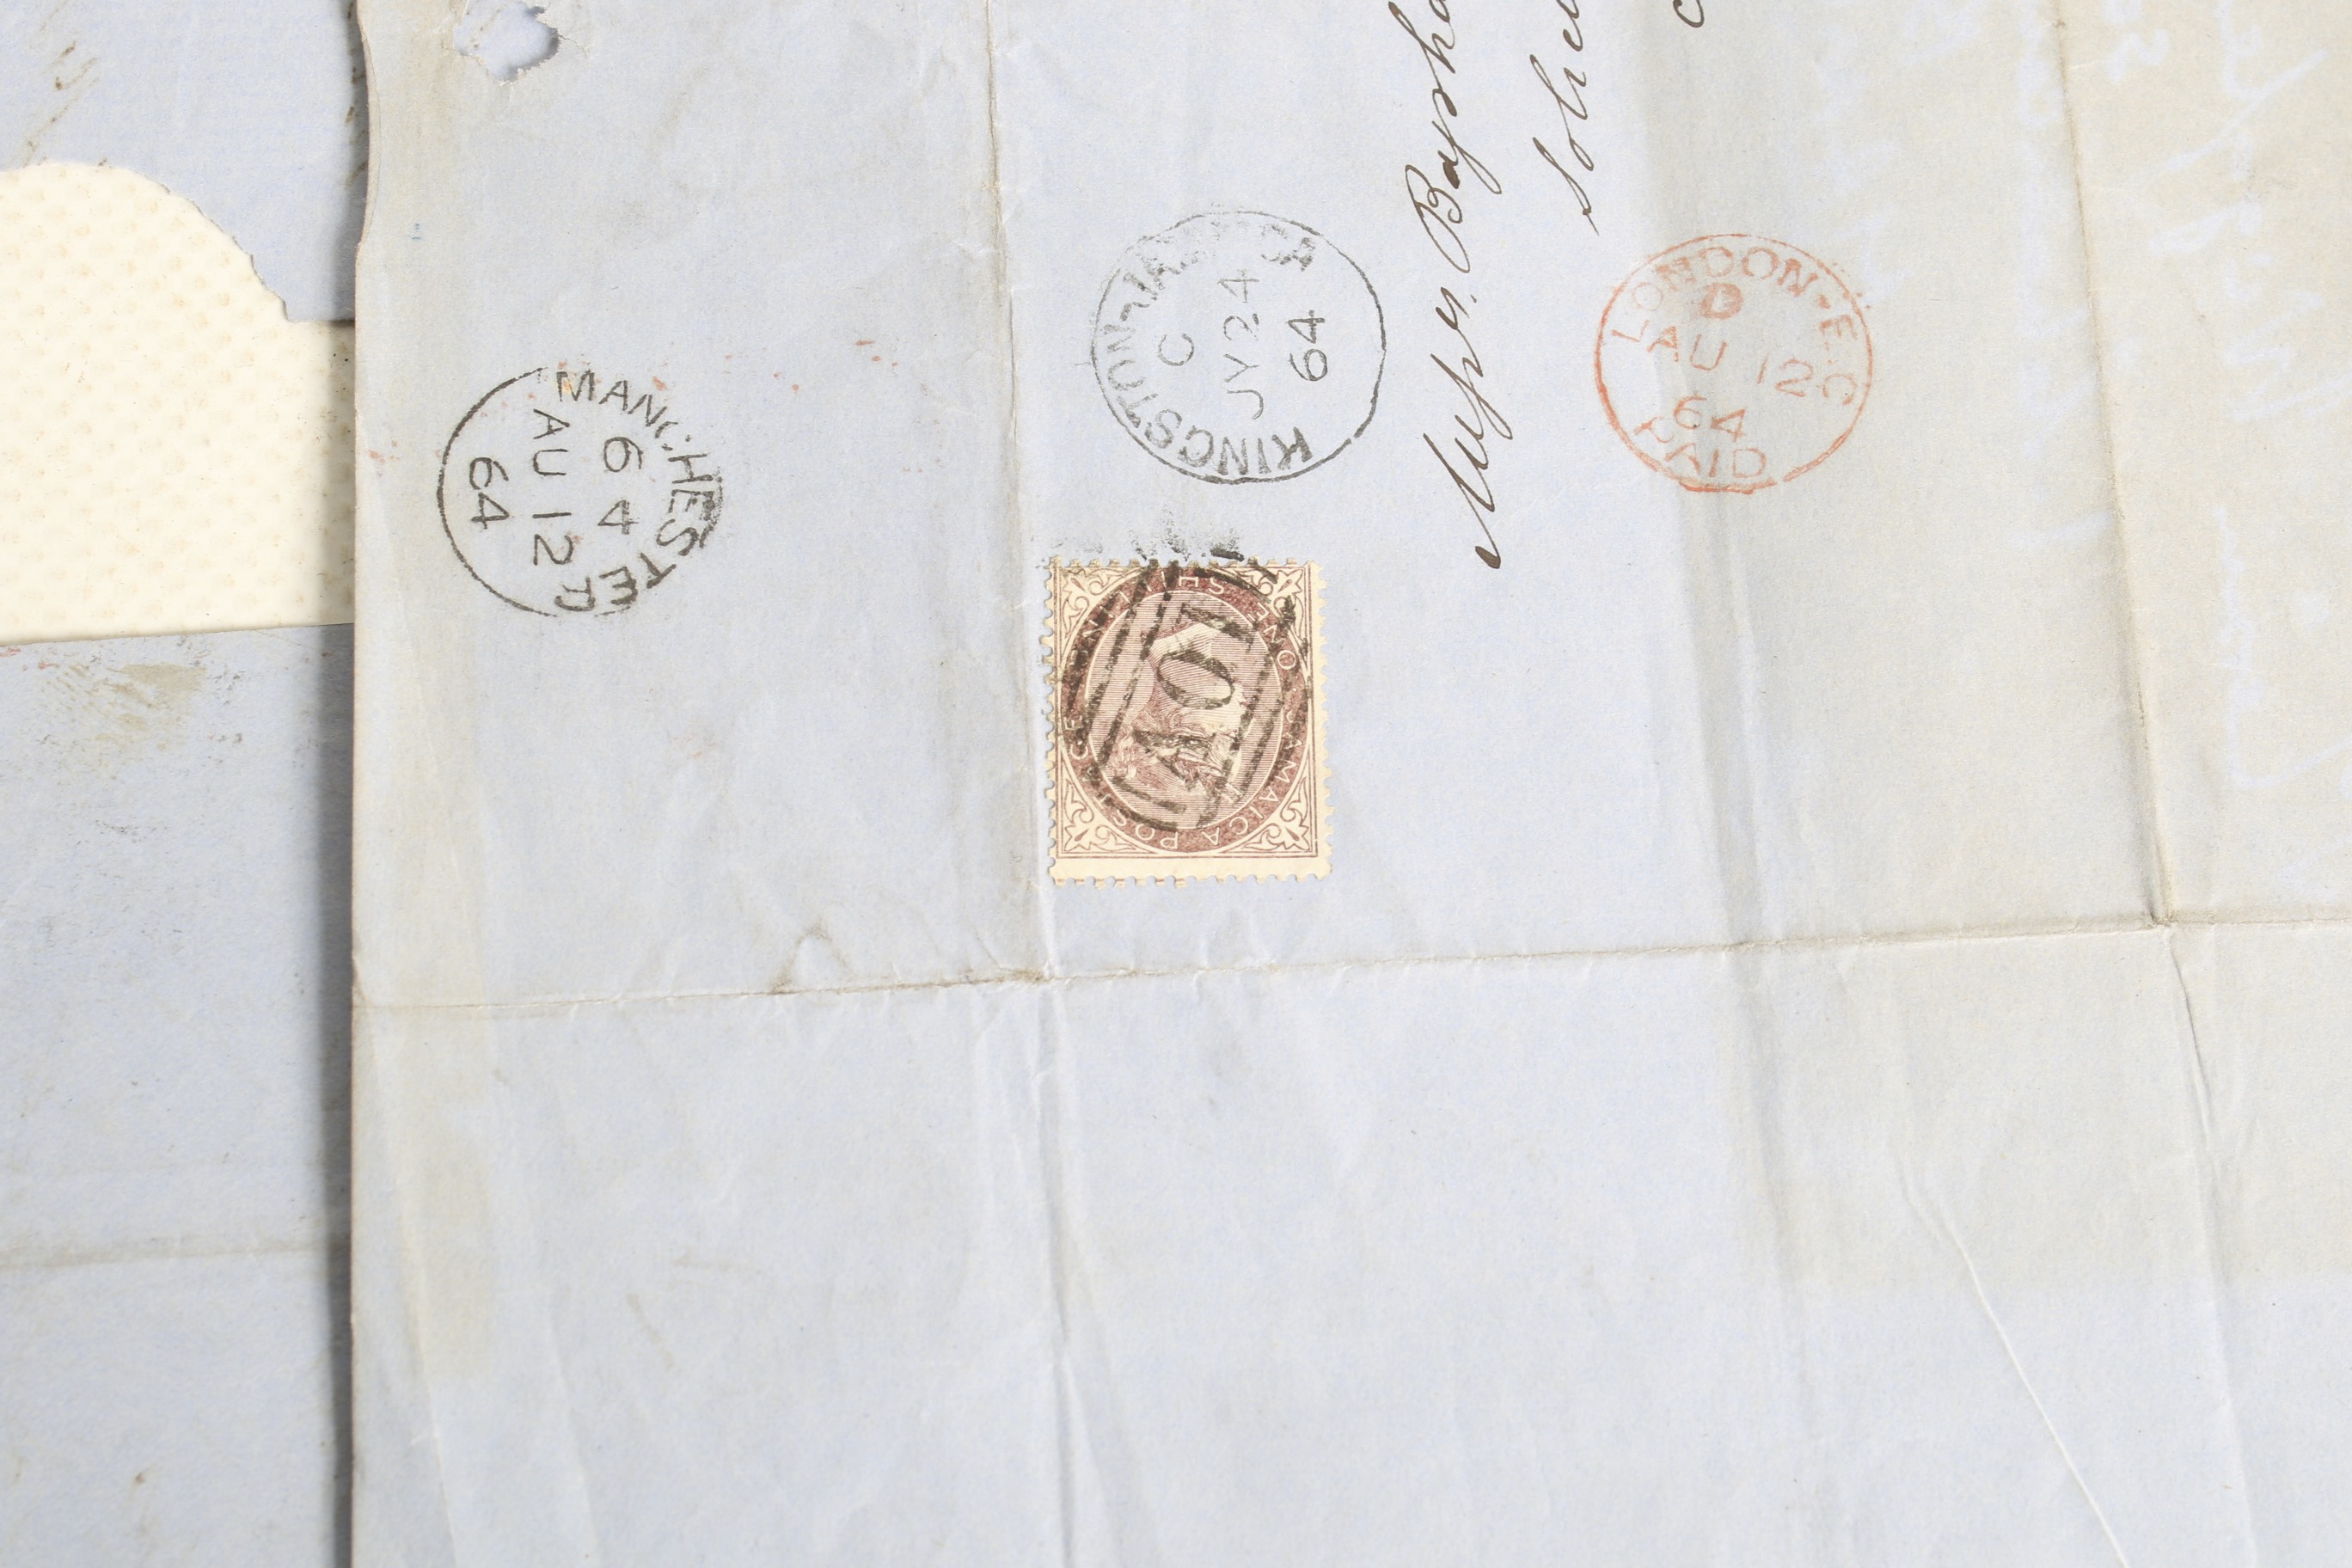 Three Jamaica one shilling stamps on covers. - Image 3 of 4